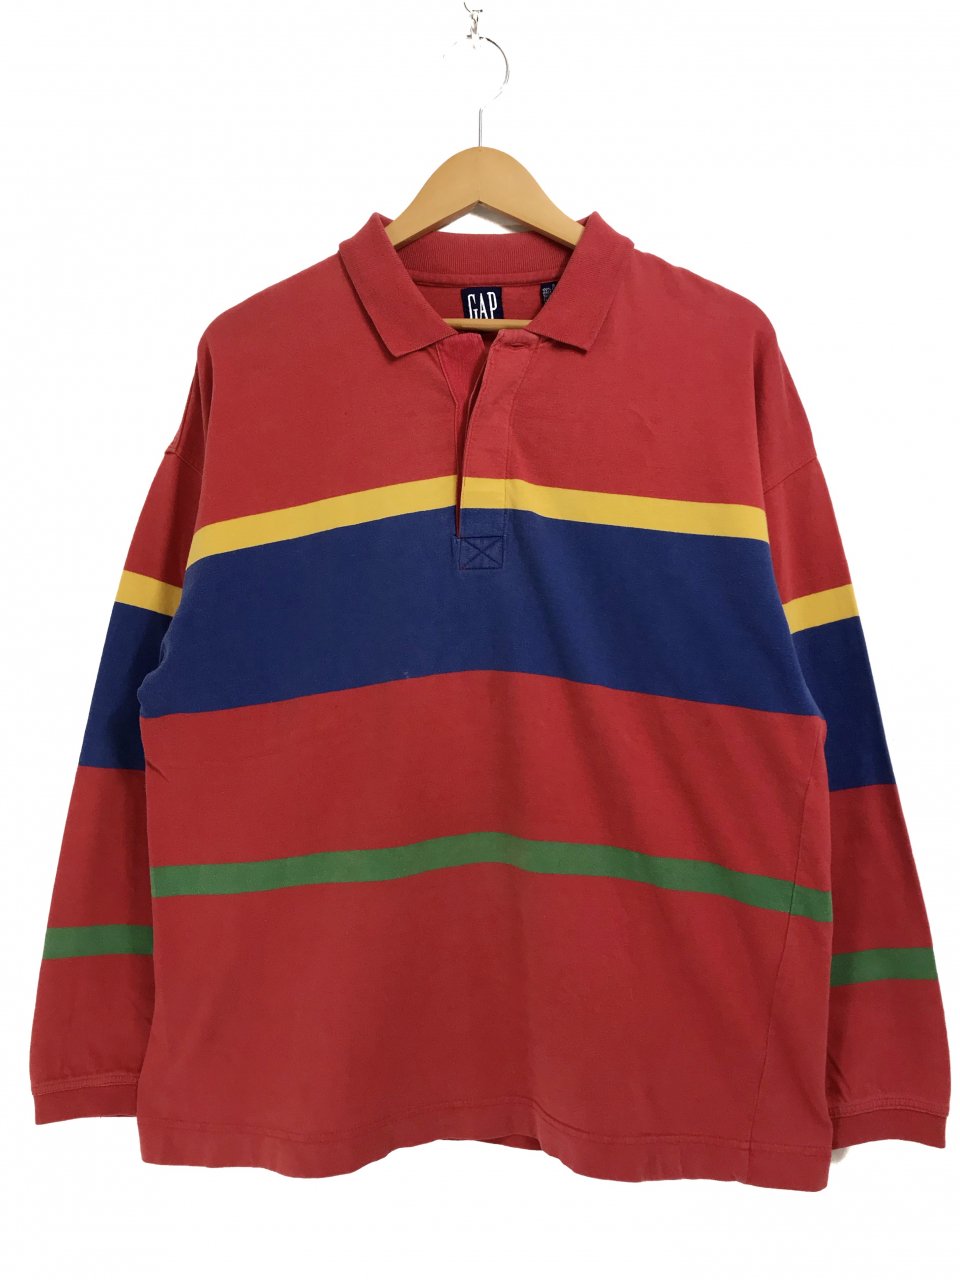 【 Martine Rose 】Polo Top ボーダー L/S ポロシャツ